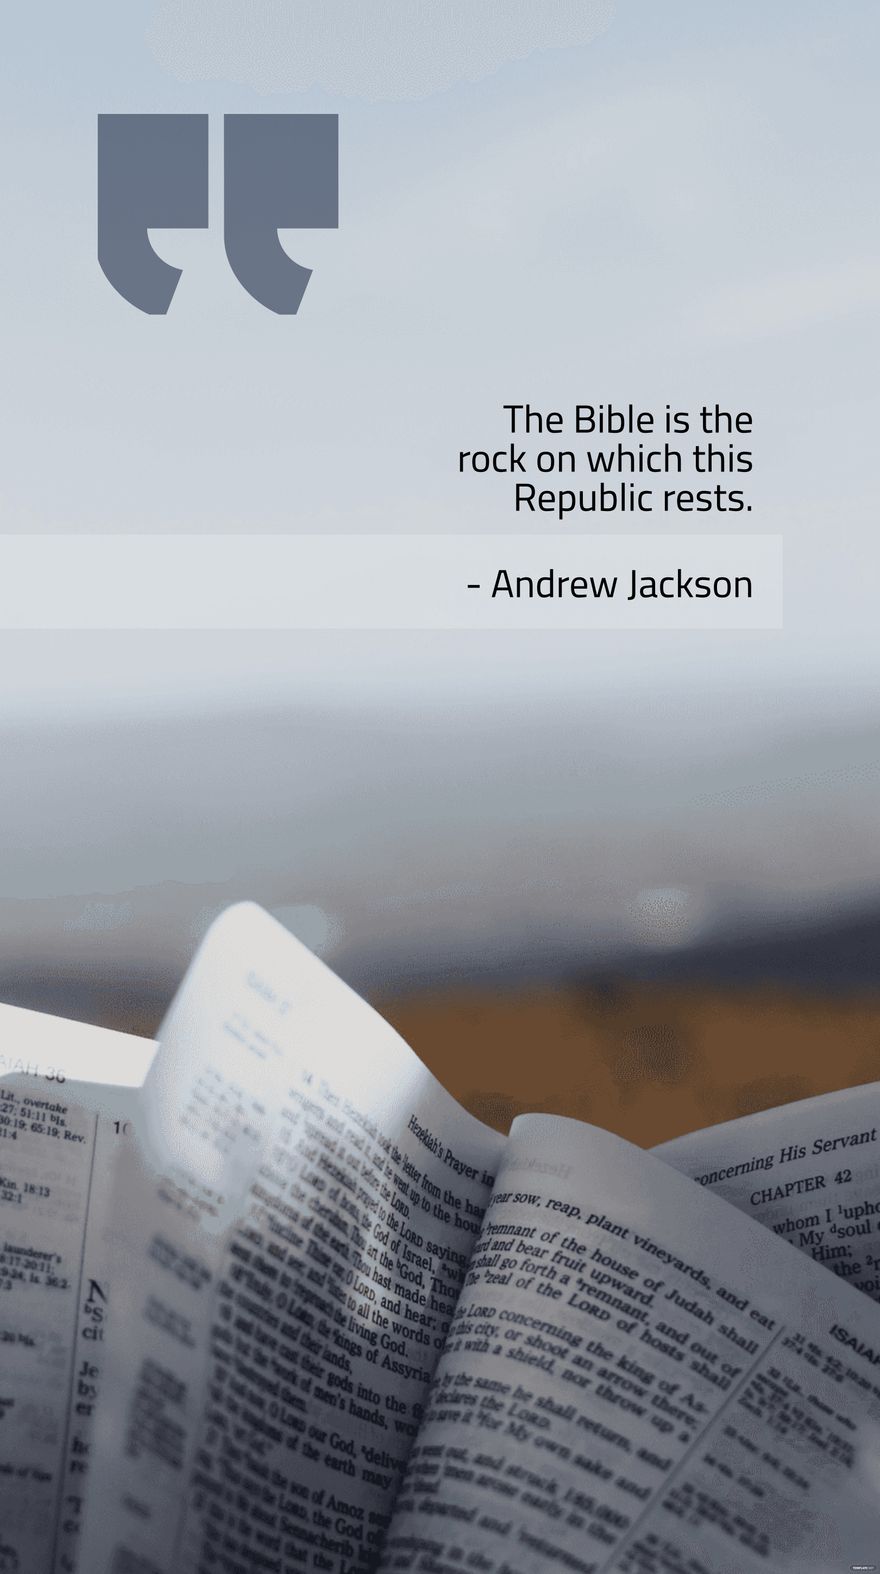 Free The Bible is the rock on which this Republic rests. - Andrew Jackson